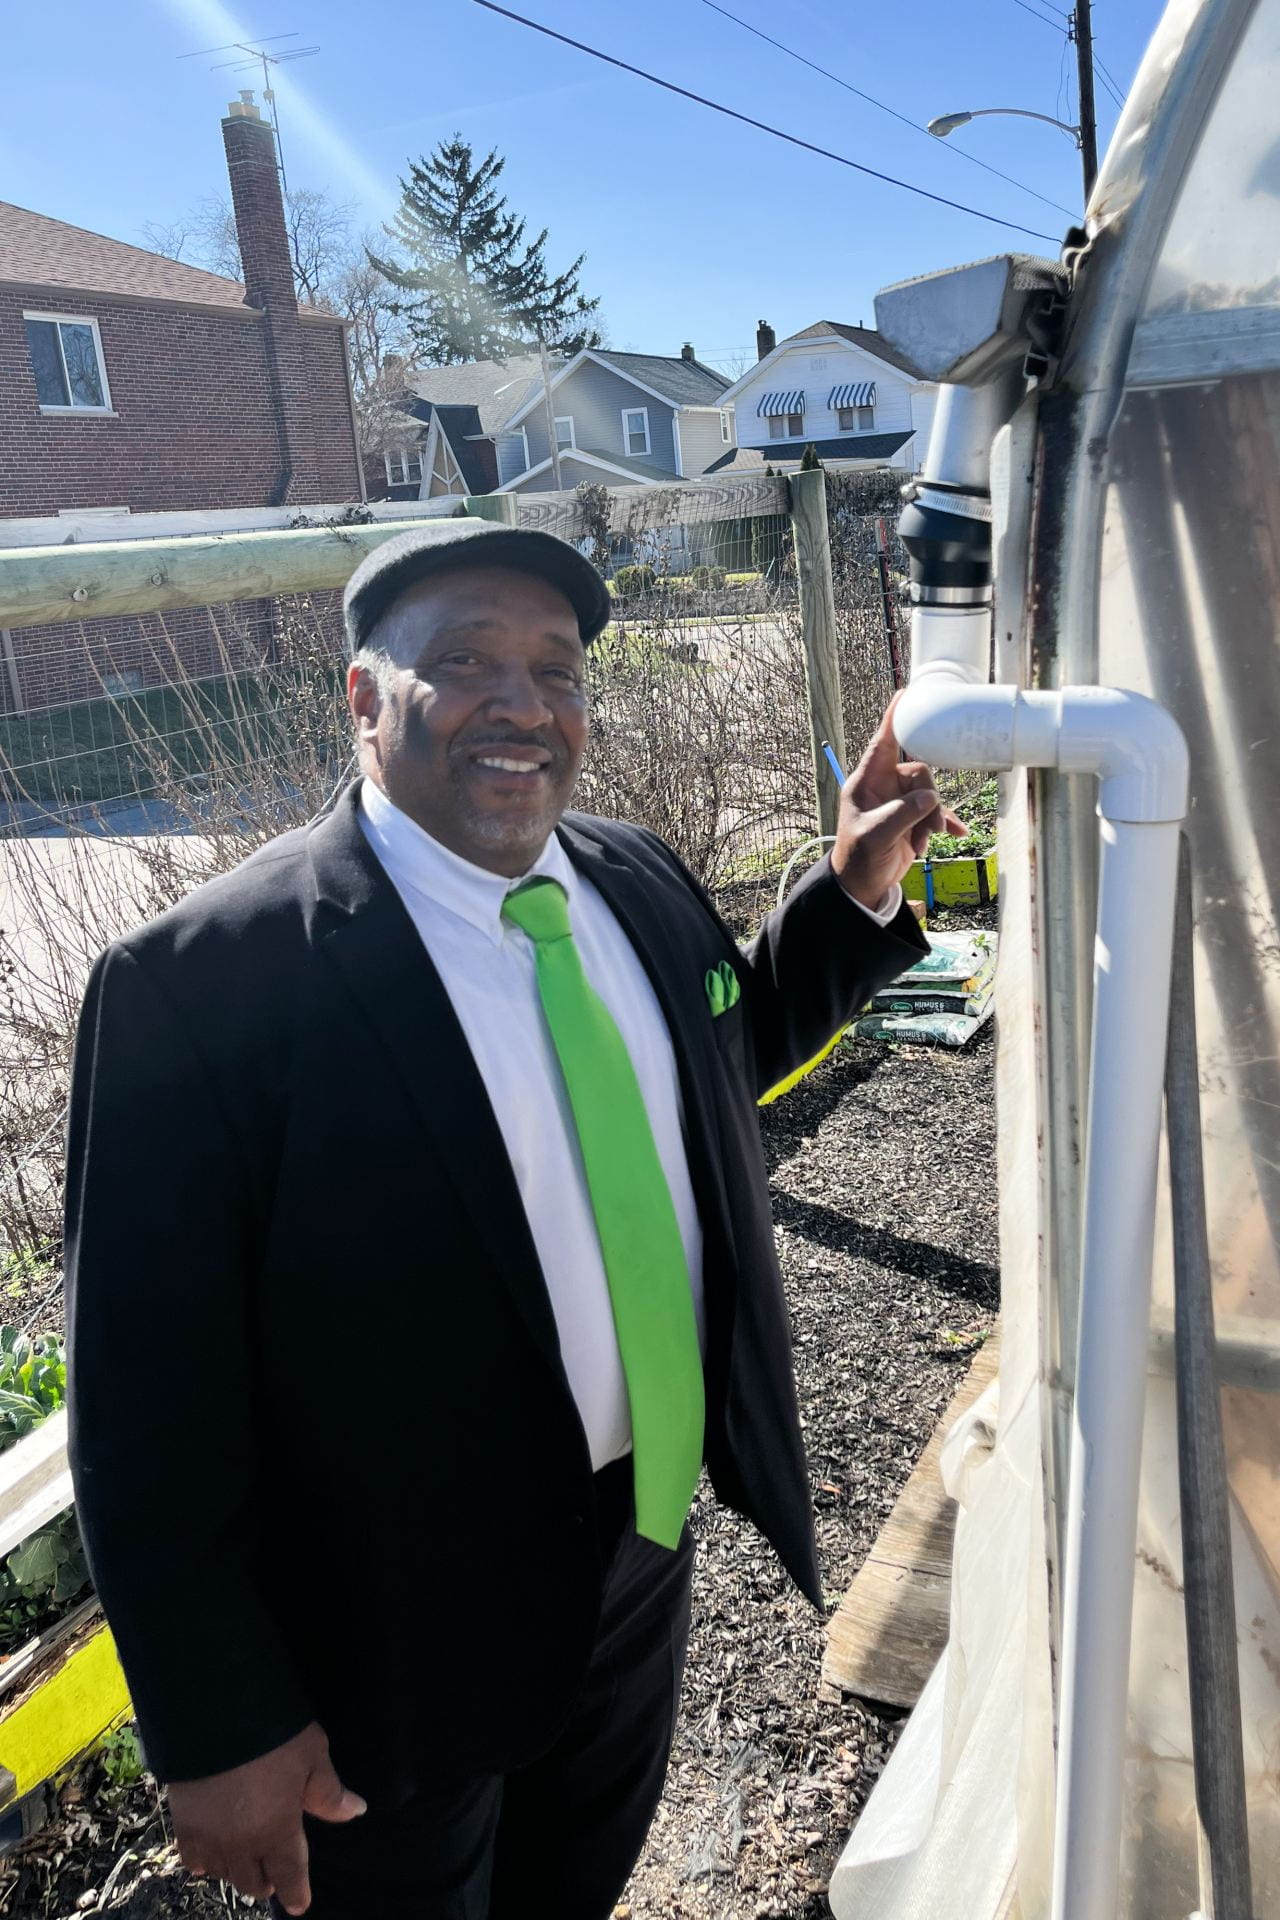 Aaron Hopkins, founder of South Side Family Farms, points to a rainwater catching system at one of his properties. Credit: Lauren Spirk | Lantern Reporter